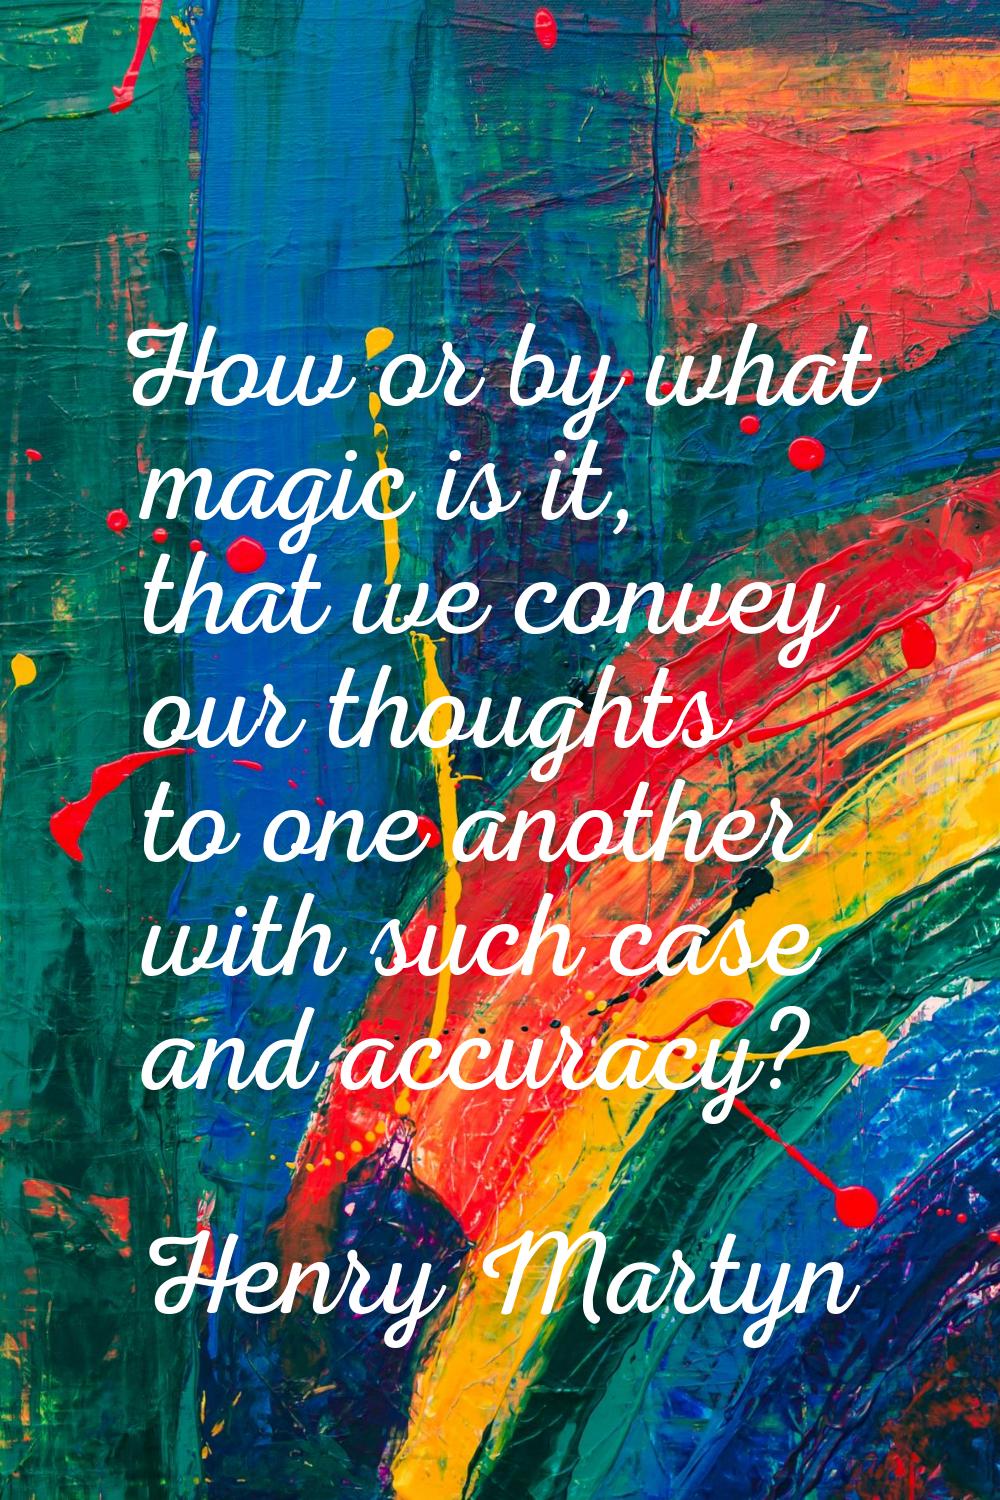 How or by what magic is it, that we convey our thoughts to one another with such case and accuracy?